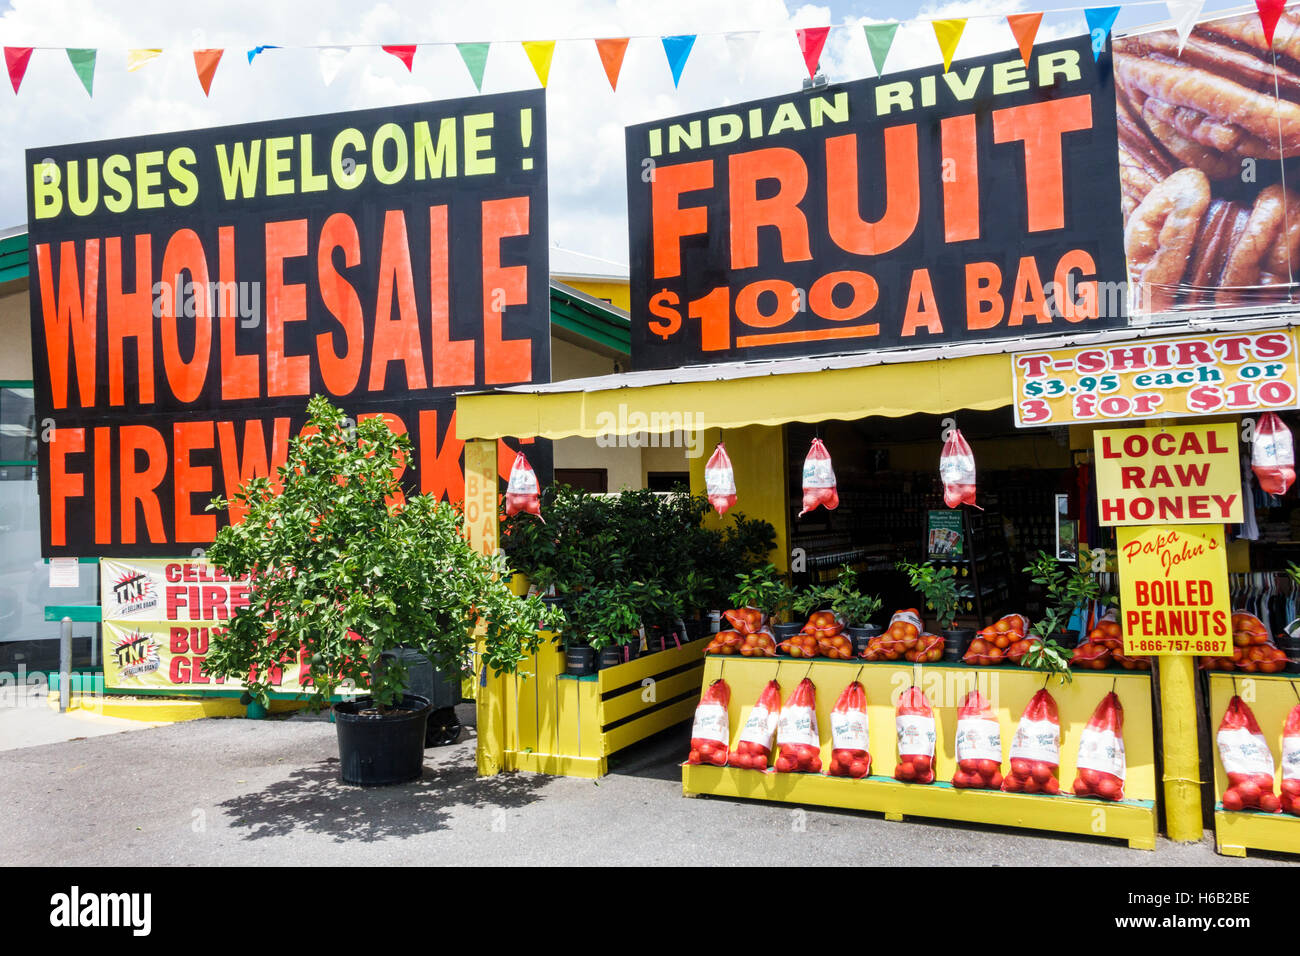 Florida Palm Coast,Indian River Fruit,roadside stand,vendor vendors seller sell selling,stall stalls booth market marketplace,produce,sale,signs,FL160 Stock Photo